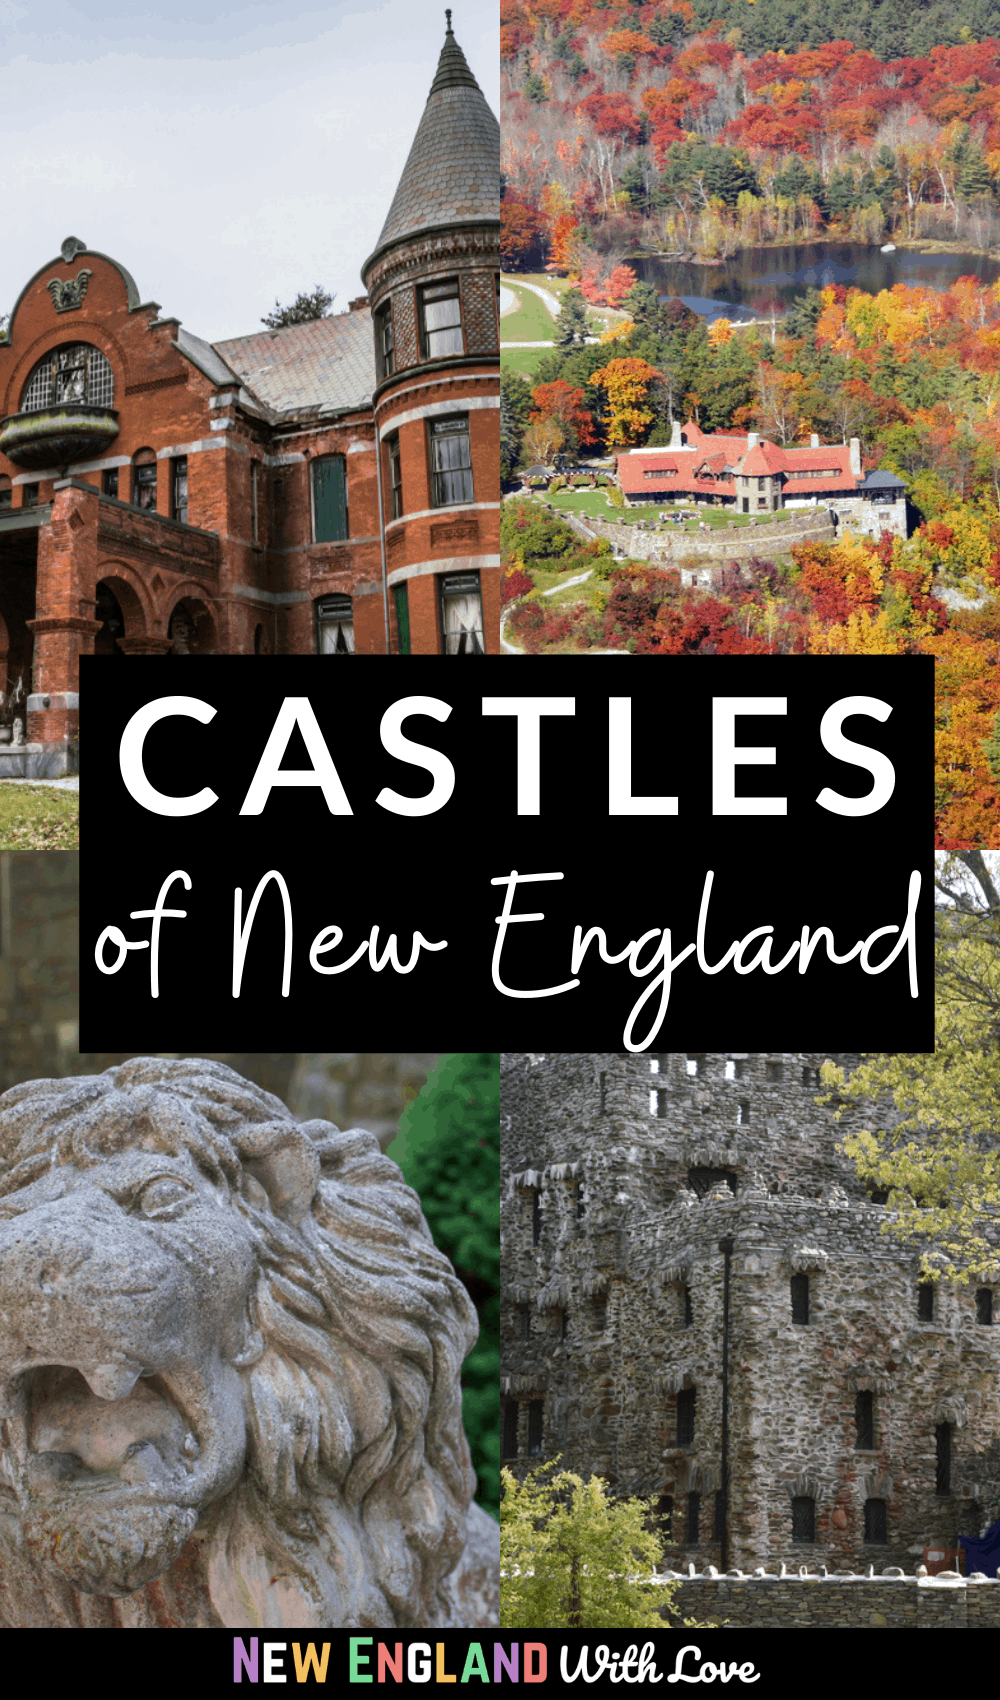 Pinterest graphic reading "CASTLES of New England"